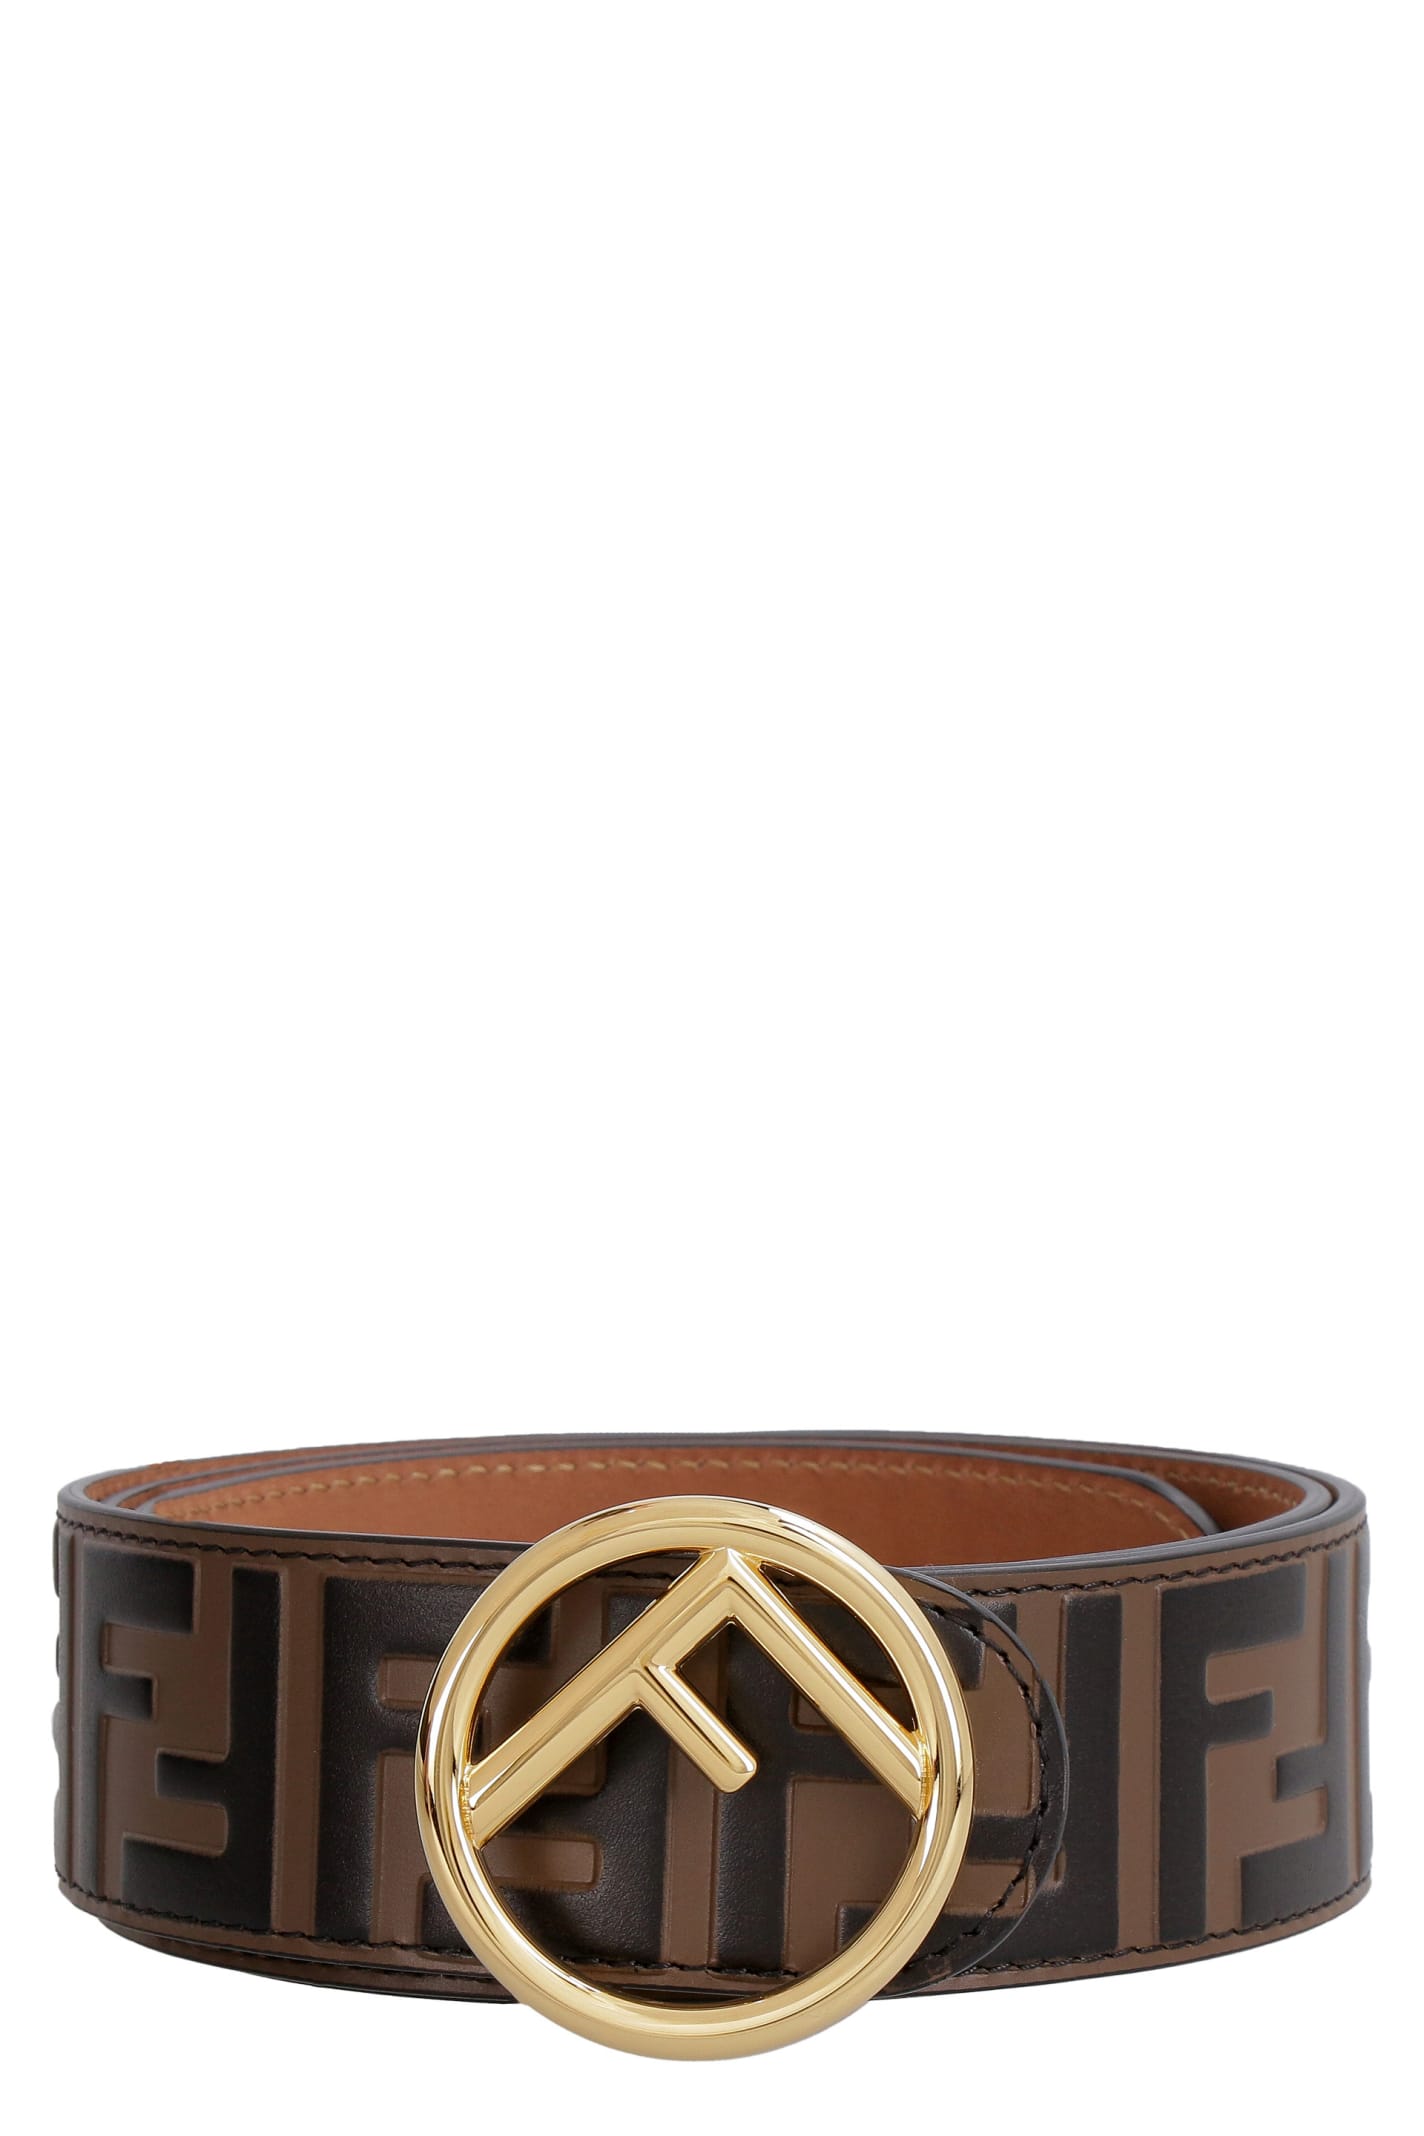 Fendi Leather Belt With Metal Buckle In Brown